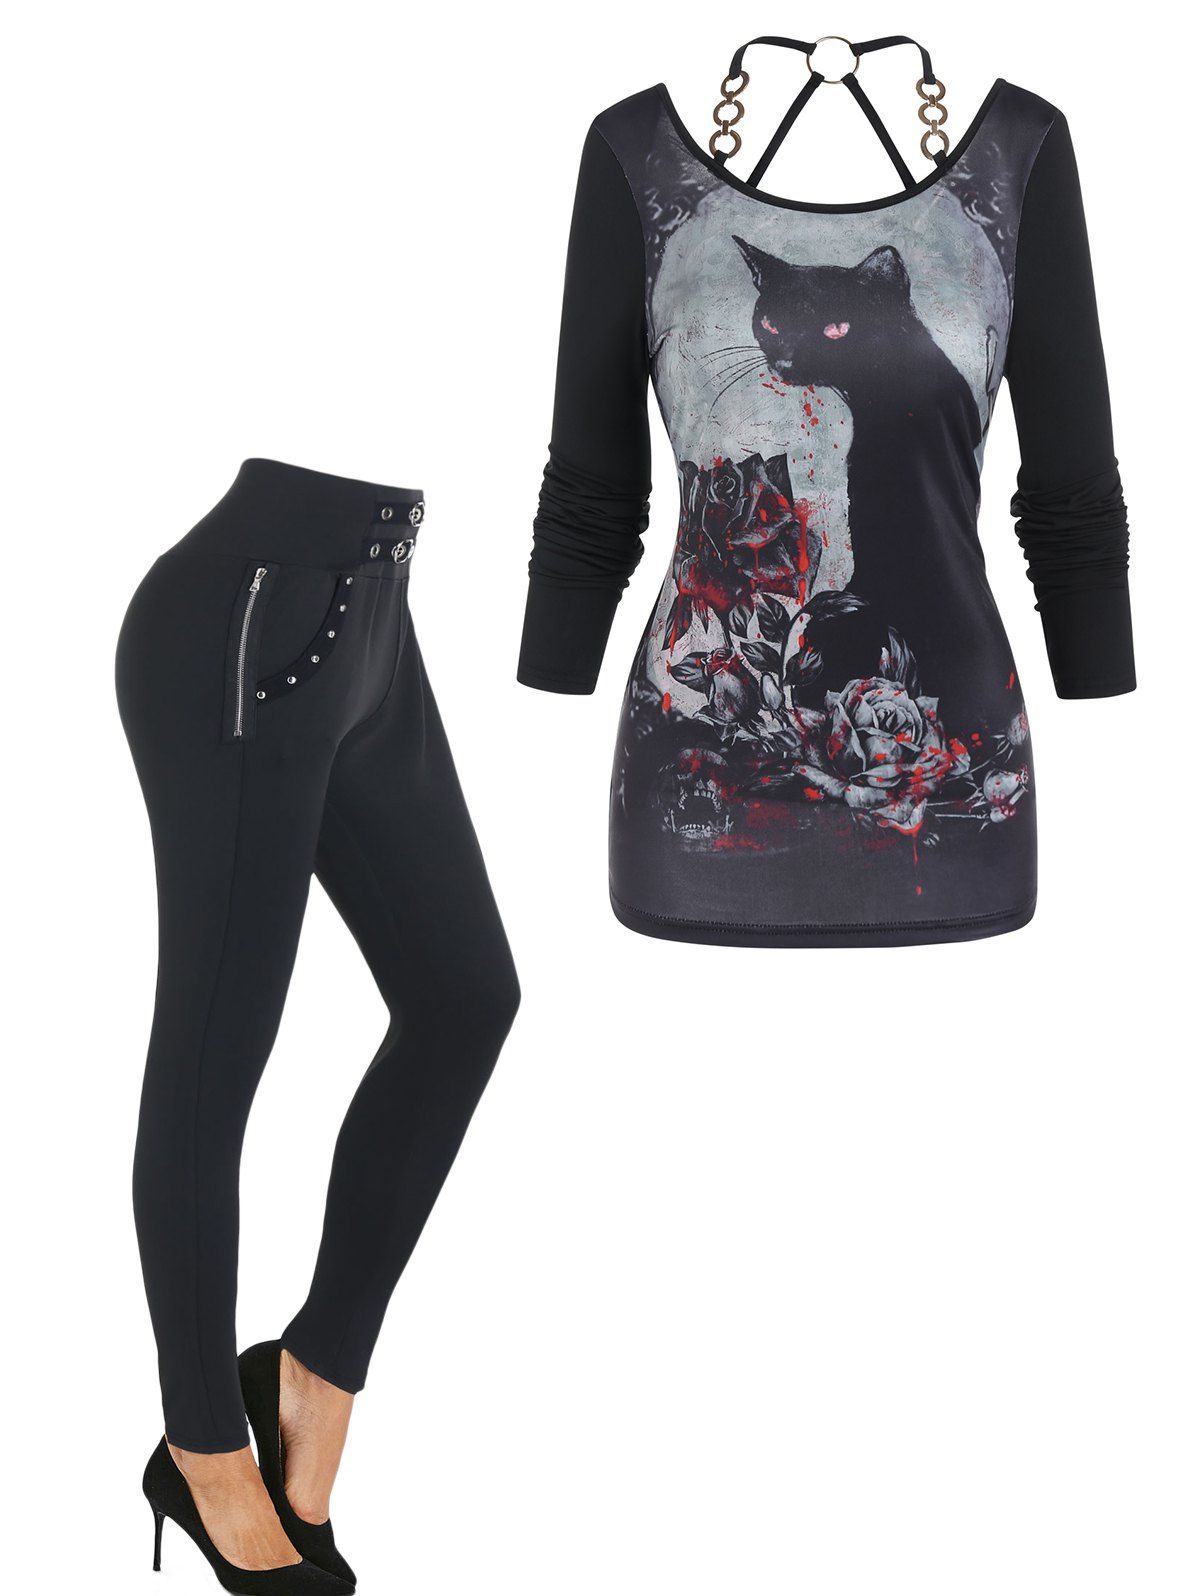 Cat Blood Rose Print O Ring Cut Out T Shirt And Buckle Zipper Embellishment Leggings Gothic Outfit - BLACK S